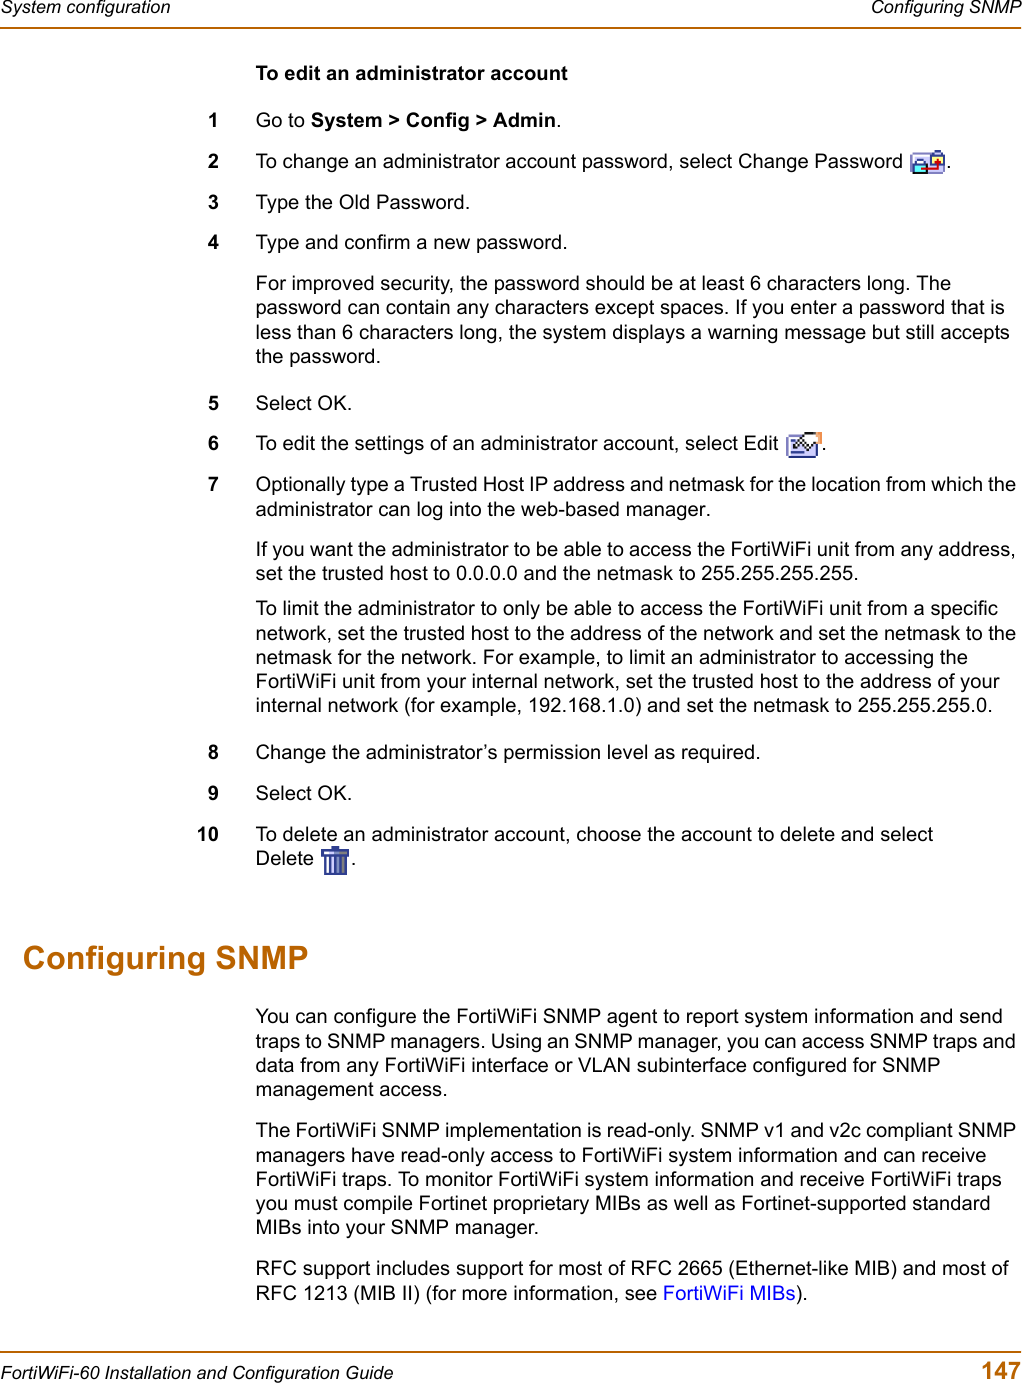 System configuration  Configuring SNMPFortiWiFi-60 Installation and Configuration Guide  147To edit an administrator account1Go to System &gt; Config &gt; Admin.2To change an administrator account password, select Change Password  .3Type the Old Password.4Type and confirm a new password.For improved security, the password should be at least 6 characters long. The password can contain any characters except spaces. If you enter a password that is less than 6 characters long, the system displays a warning message but still accepts the password.5Select OK.6To edit the settings of an administrator account, select Edit  .7Optionally type a Trusted Host IP address and netmask for the location from which the administrator can log into the web-based manager.If you want the administrator to be able to access the FortiWiFi unit from any address, set the trusted host to 0.0.0.0 and the netmask to 255.255.255.255.To limit the administrator to only be able to access the FortiWiFi unit from a specific network, set the trusted host to the address of the network and set the netmask to the netmask for the network. For example, to limit an administrator to accessing the FortiWiFi unit from your internal network, set the trusted host to the address of your internal network (for example, 192.168.1.0) and set the netmask to 255.255.255.0.8Change the administrator’s permission level as required.9Select OK.10 To delete an administrator account, choose the account to delete and select Delete .Configuring SNMPYou can configure the FortiWiFi SNMP agent to report system information and send traps to SNMP managers. Using an SNMP manager, you can access SNMP traps and data from any FortiWiFi interface or VLAN subinterface configured for SNMP management access.The FortiWiFi SNMP implementation is read-only. SNMP v1 and v2c compliant SNMP managers have read-only access to FortiWiFi system information and can receive FortiWiFi traps. To monitor FortiWiFi system information and receive FortiWiFi traps you must compile Fortinet proprietary MIBs as well as Fortinet-supported standard MIBs into your SNMP manager.RFC support includes support for most of RFC 2665 (Ethernet-like MIB) and most of RFC 1213 (MIB II) (for more information, see FortiWiFi MIBs).